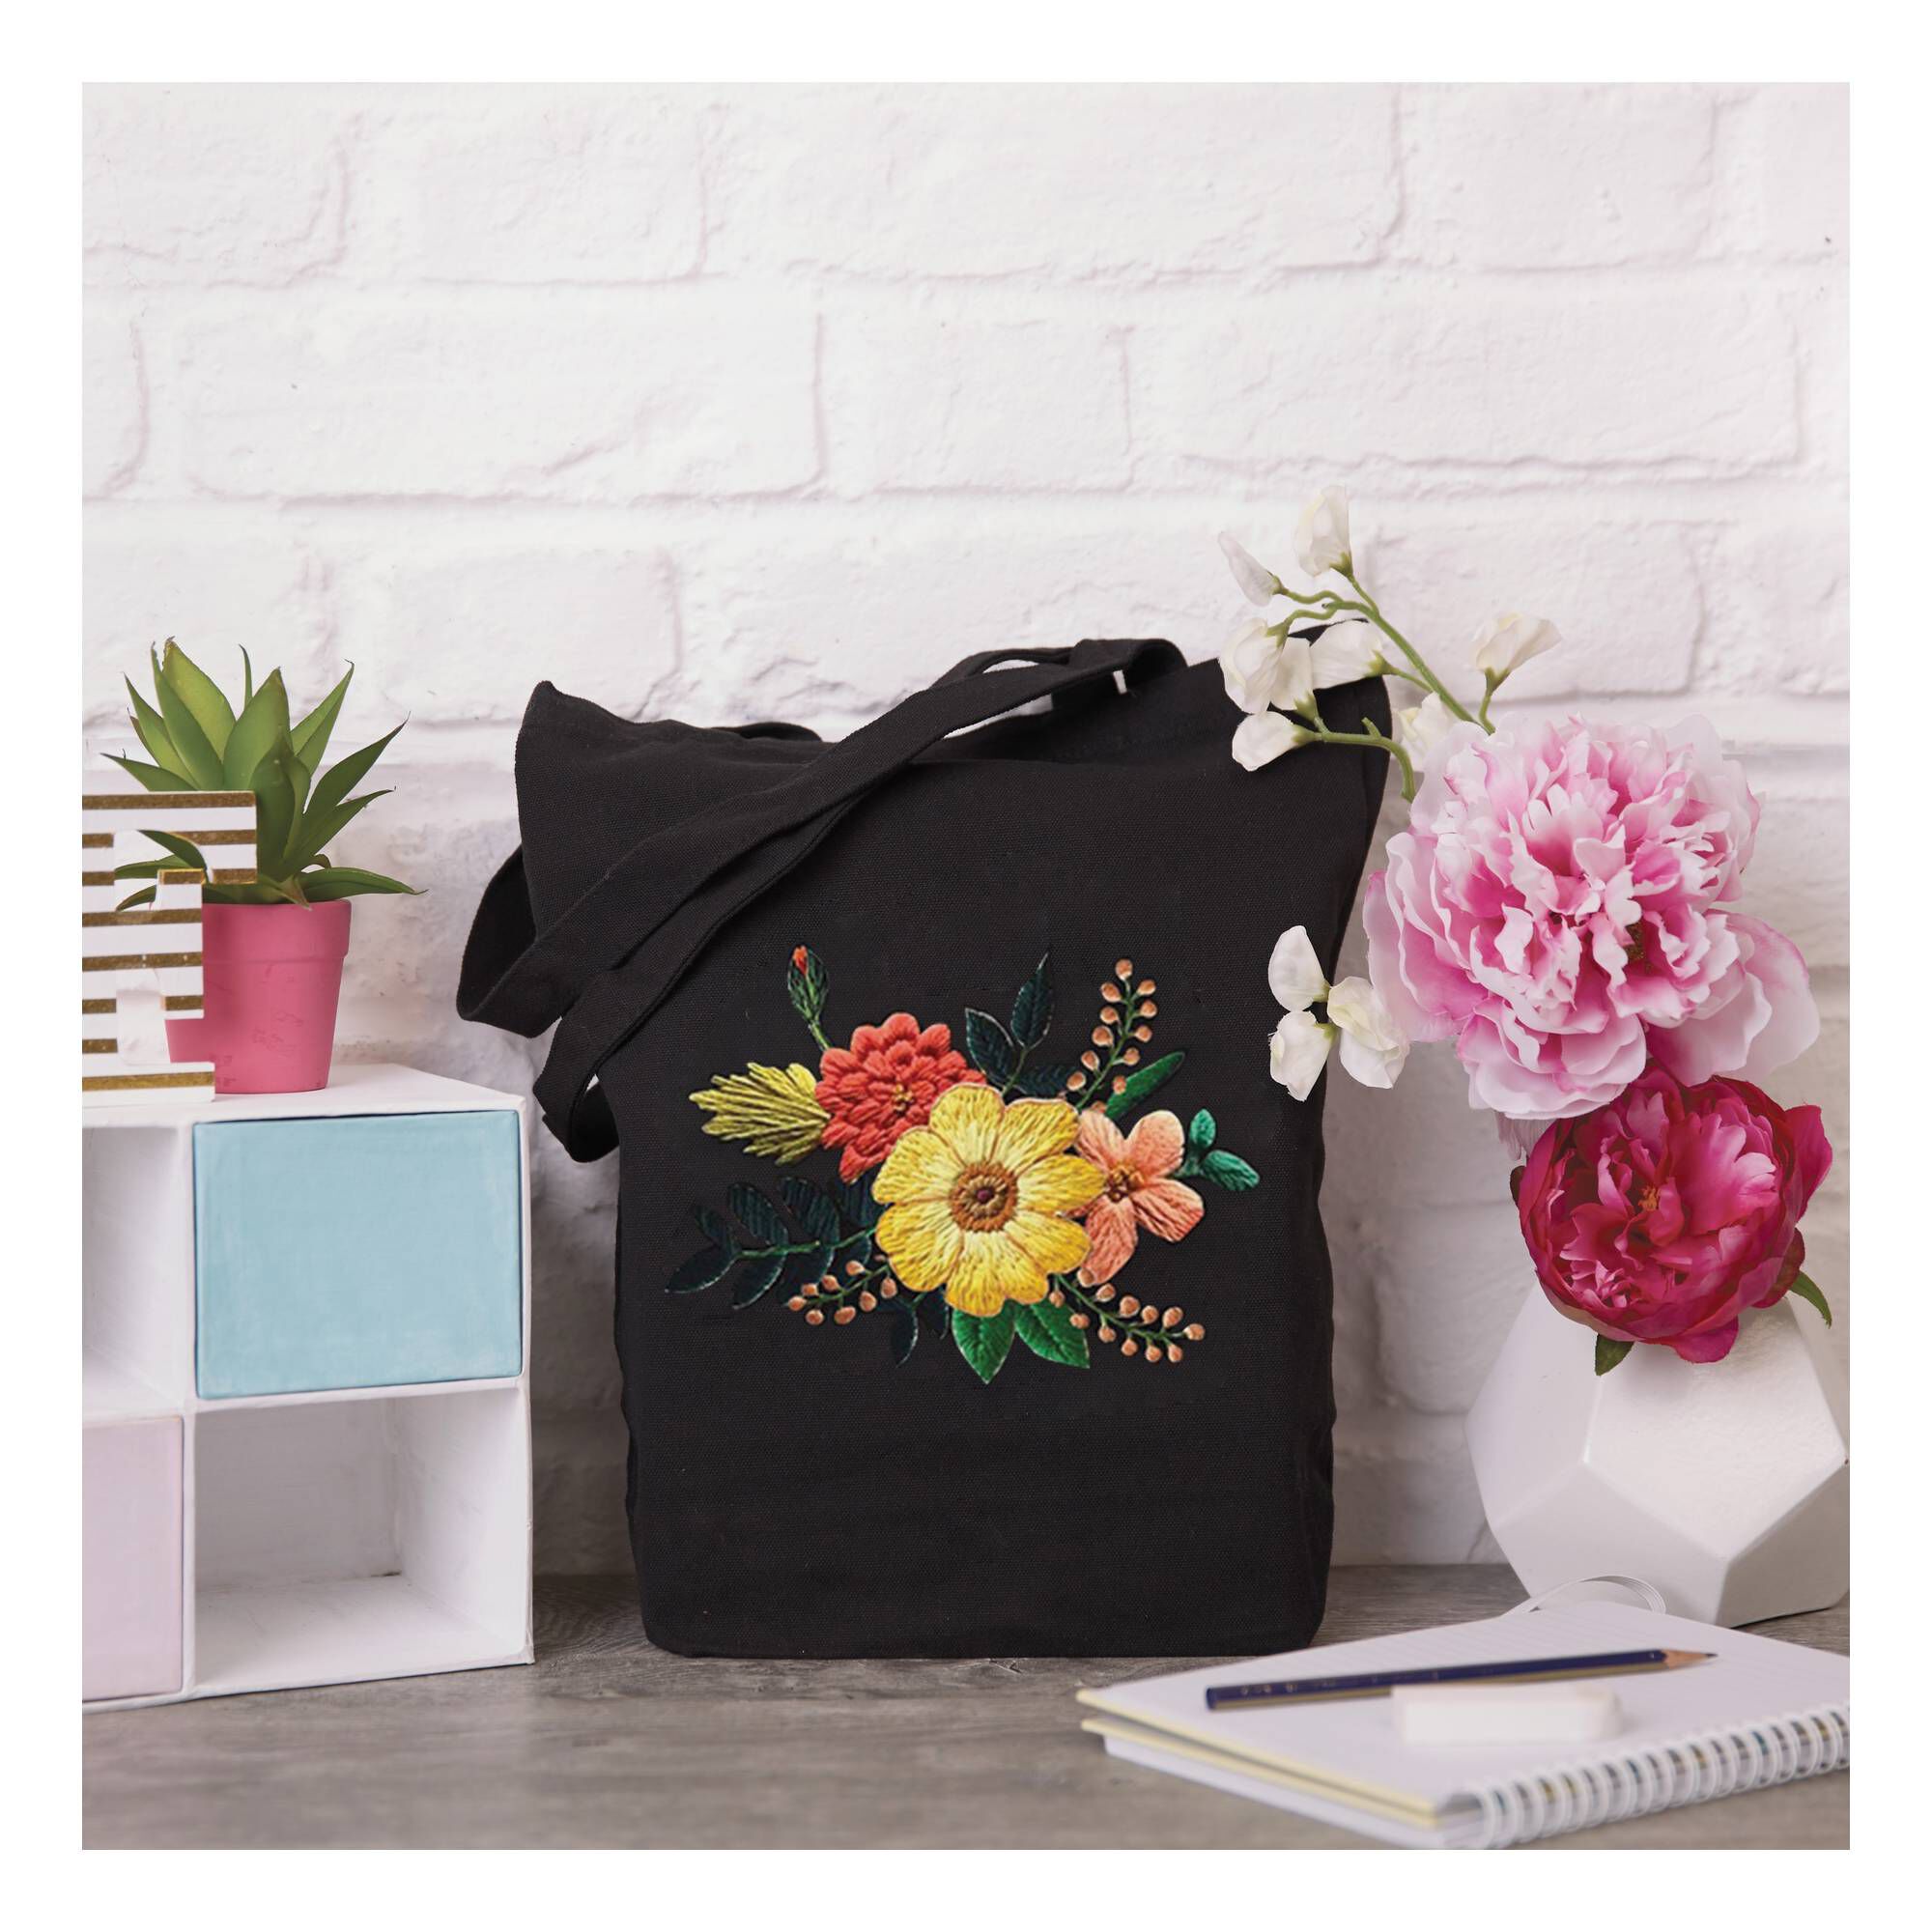 Hand Flower Embroidery Bag Kit, Oversized Army Green Women's Shoulder Bag  With 3d Embroidery Pattern, Autumn Cotton Stems Tote Bag-34x51cm - Etsy